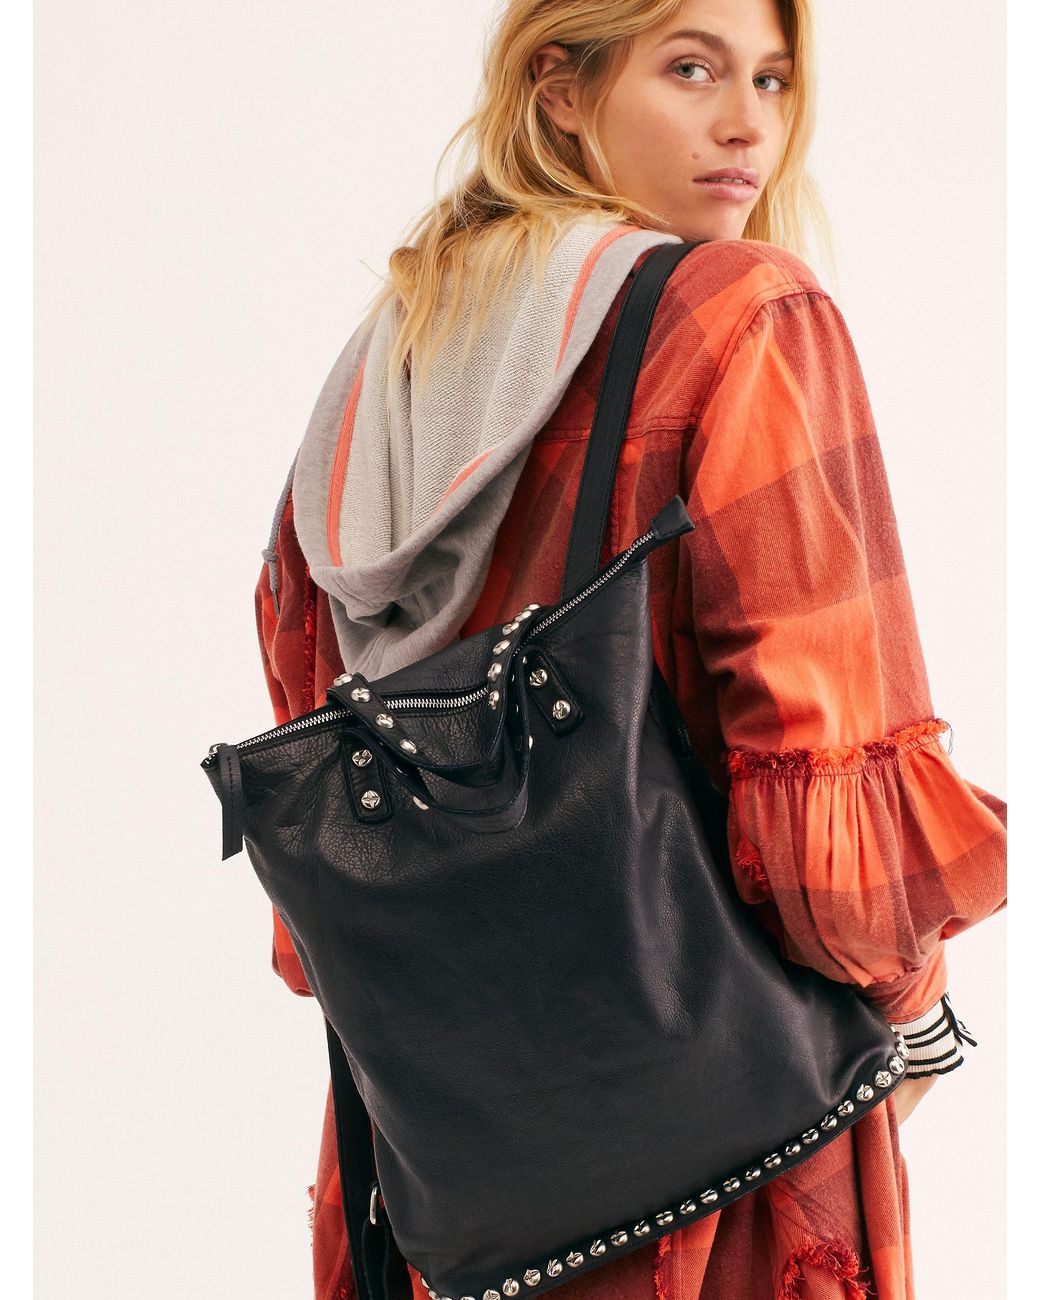 Free People Ellie Leather Studded Backpack in Black | Lyst